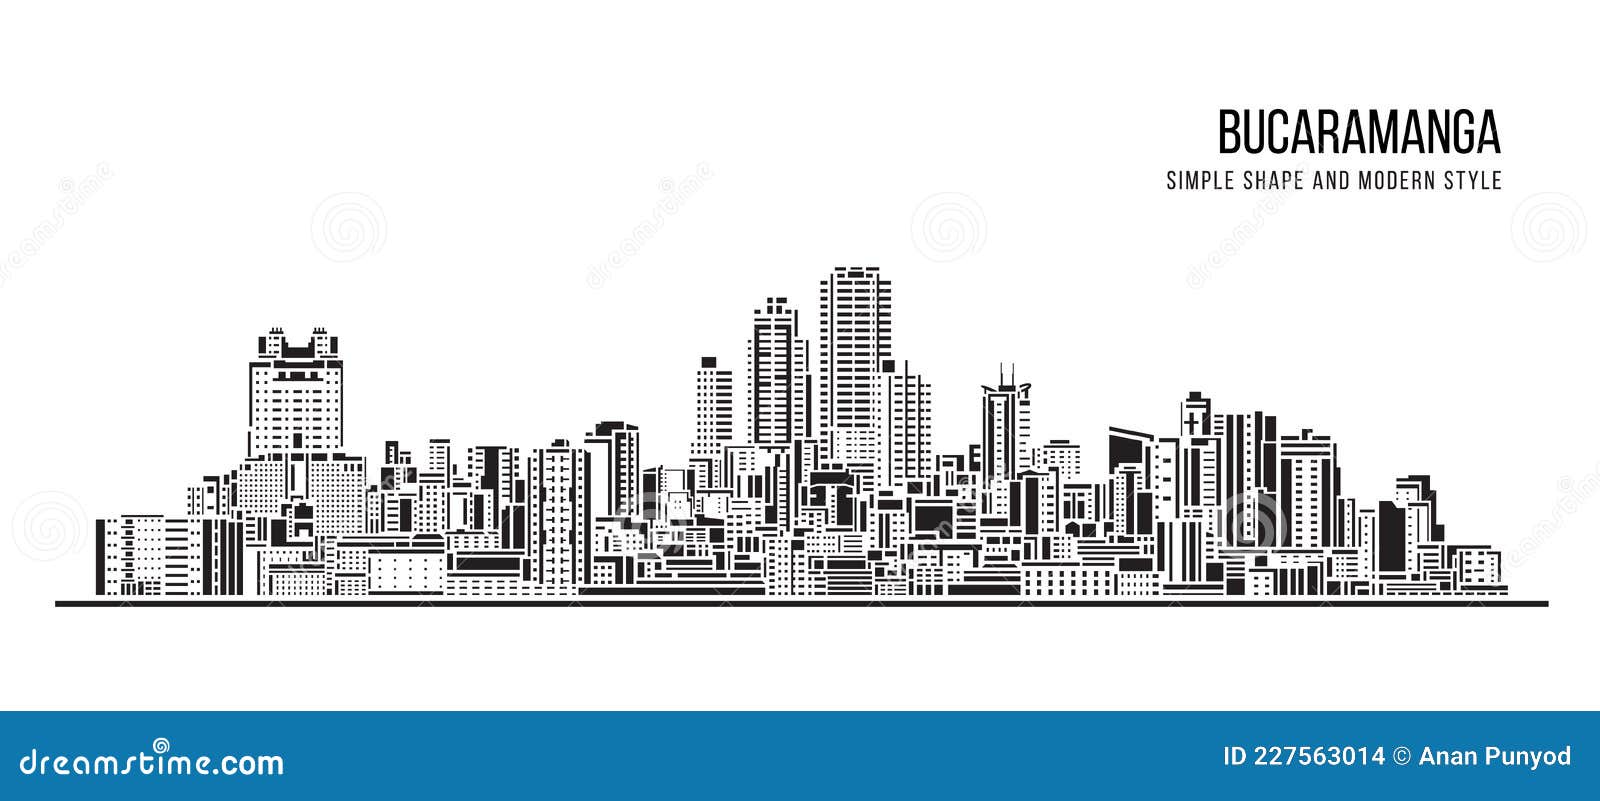 cityscape building abstract simple  and modern style art   - bucaramanga